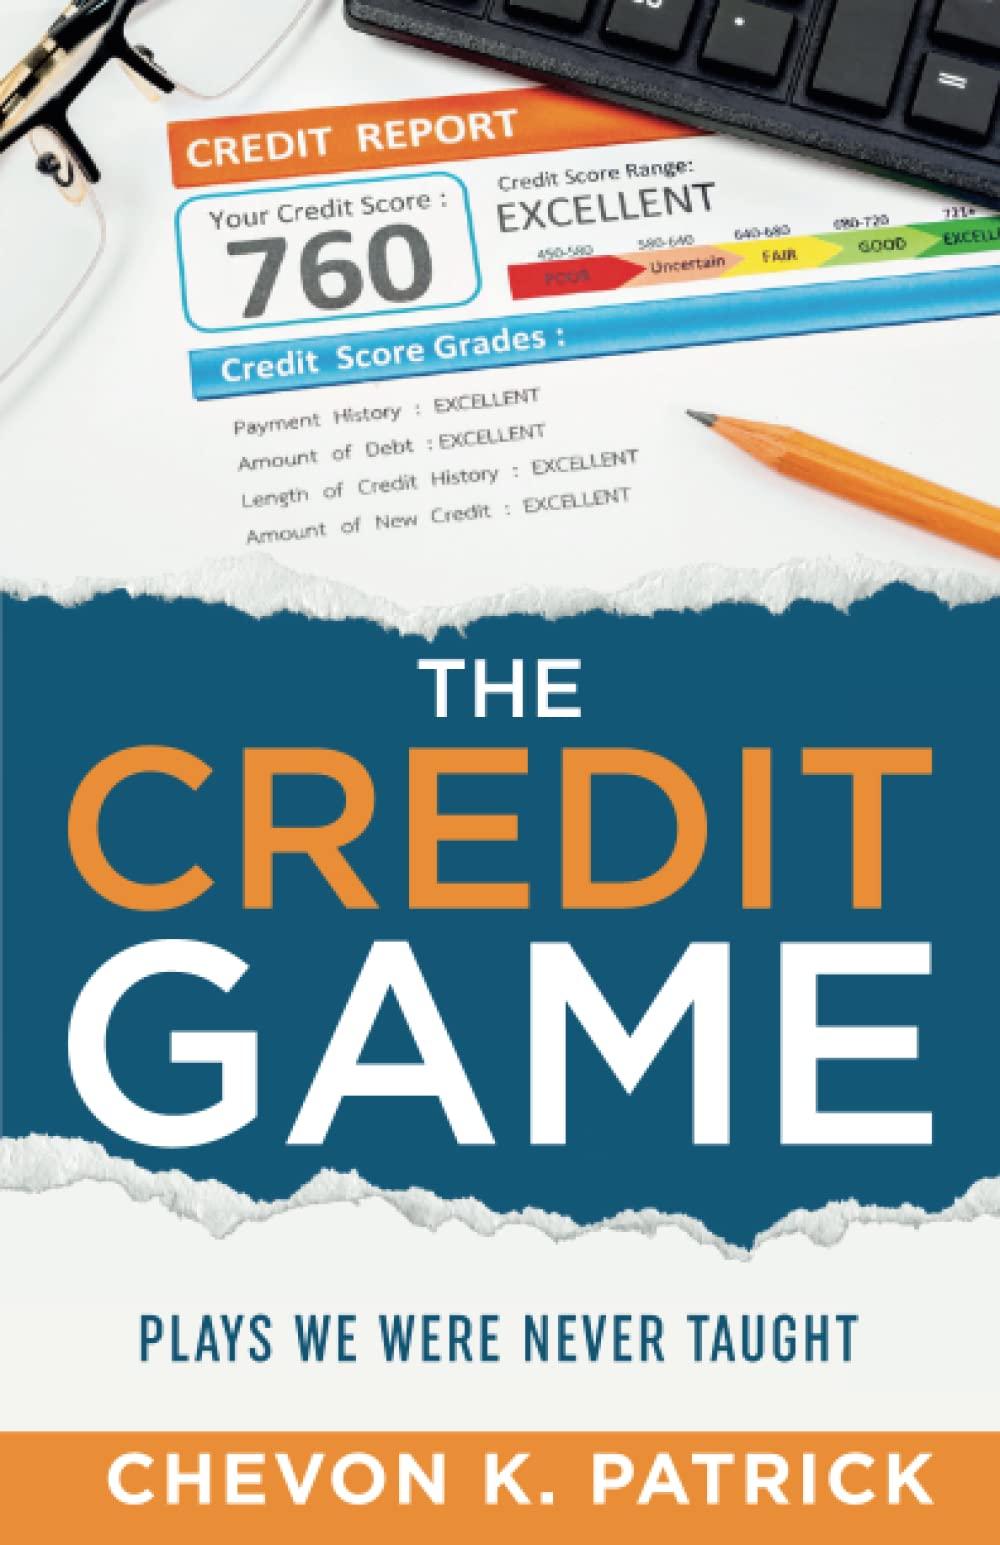 the credit game plays we were never taught 1st edition chevon k. patrick b0bdsrql4m, 979-8986578408